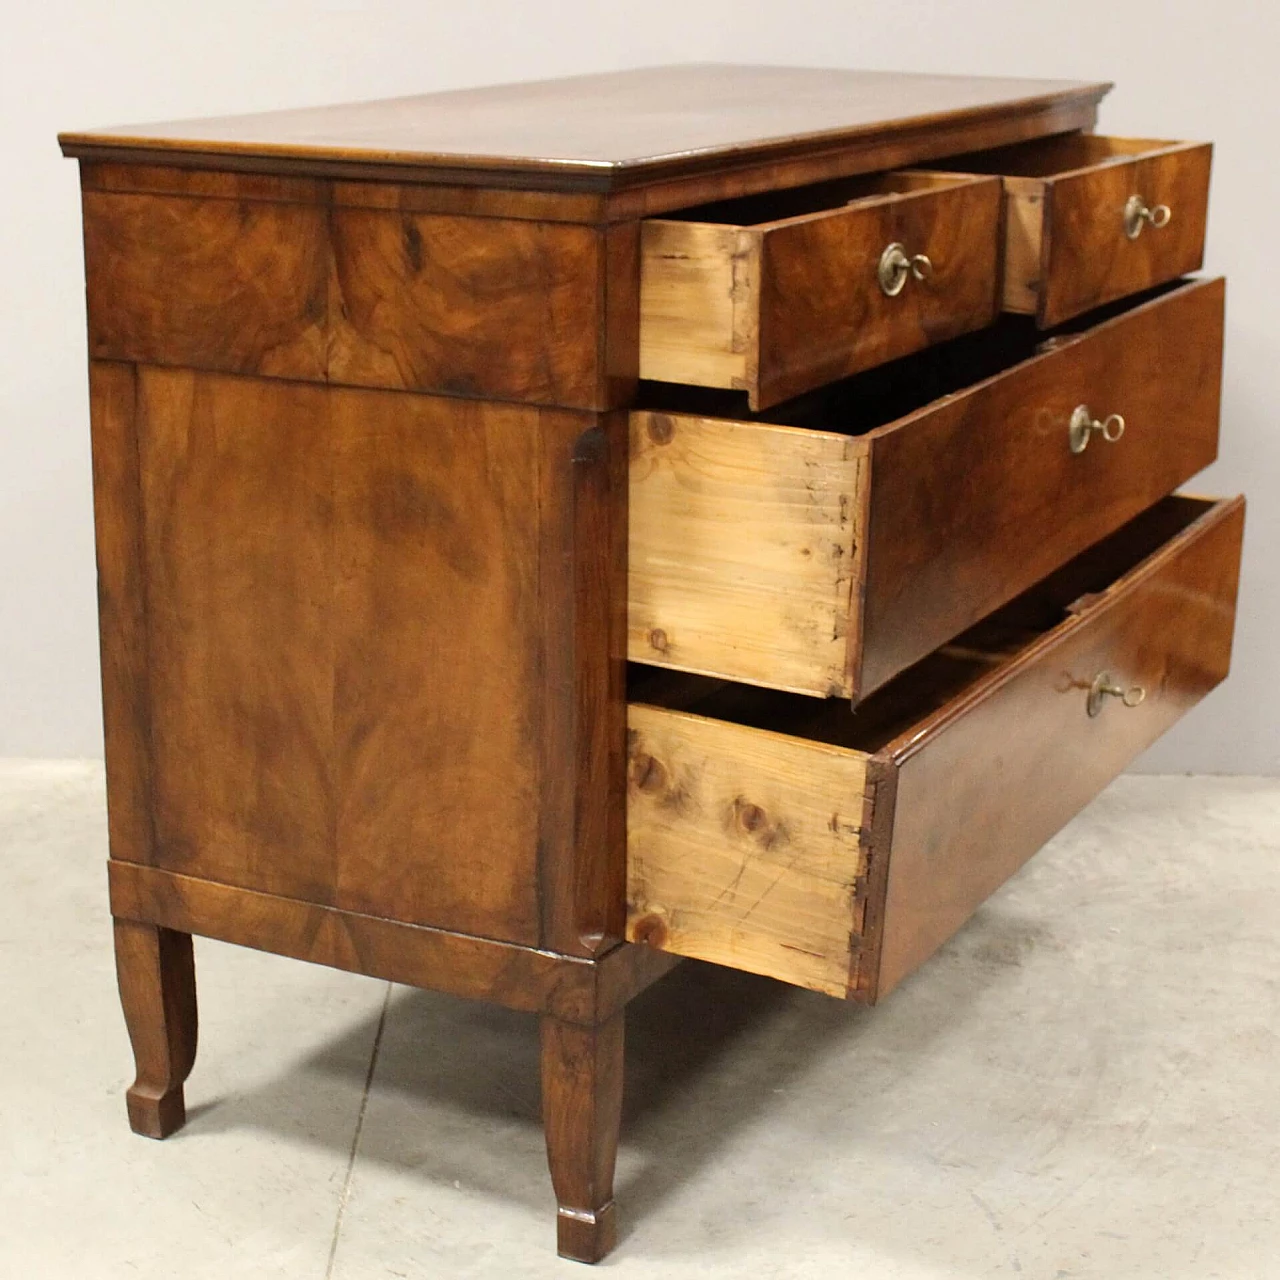 Direttorio chest of drawers in solid walnut and walnut panelling, second half of the 18th century 3